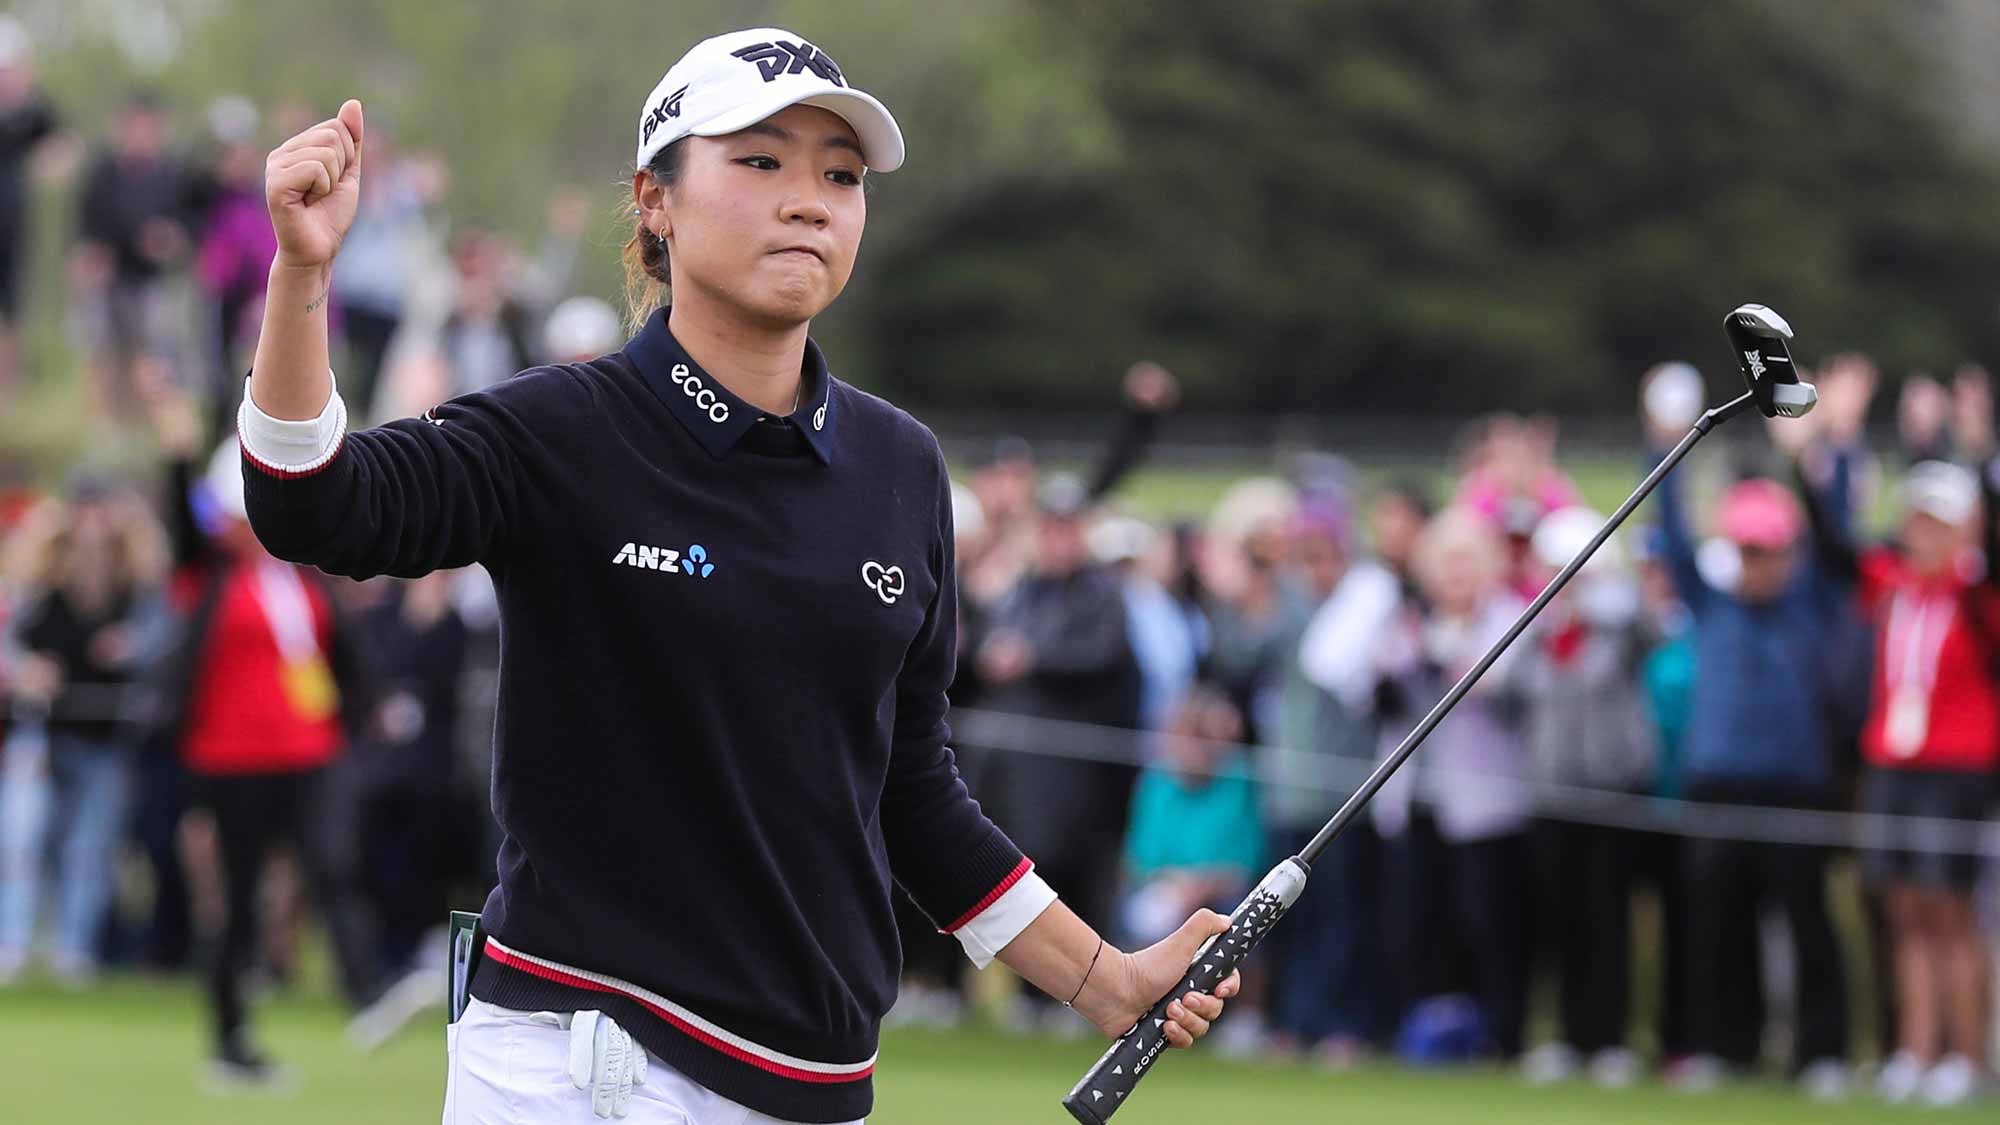 Lydia Ko Reacts To Making Putt During Third Round of MCKAYSON New Zealand Women's Open